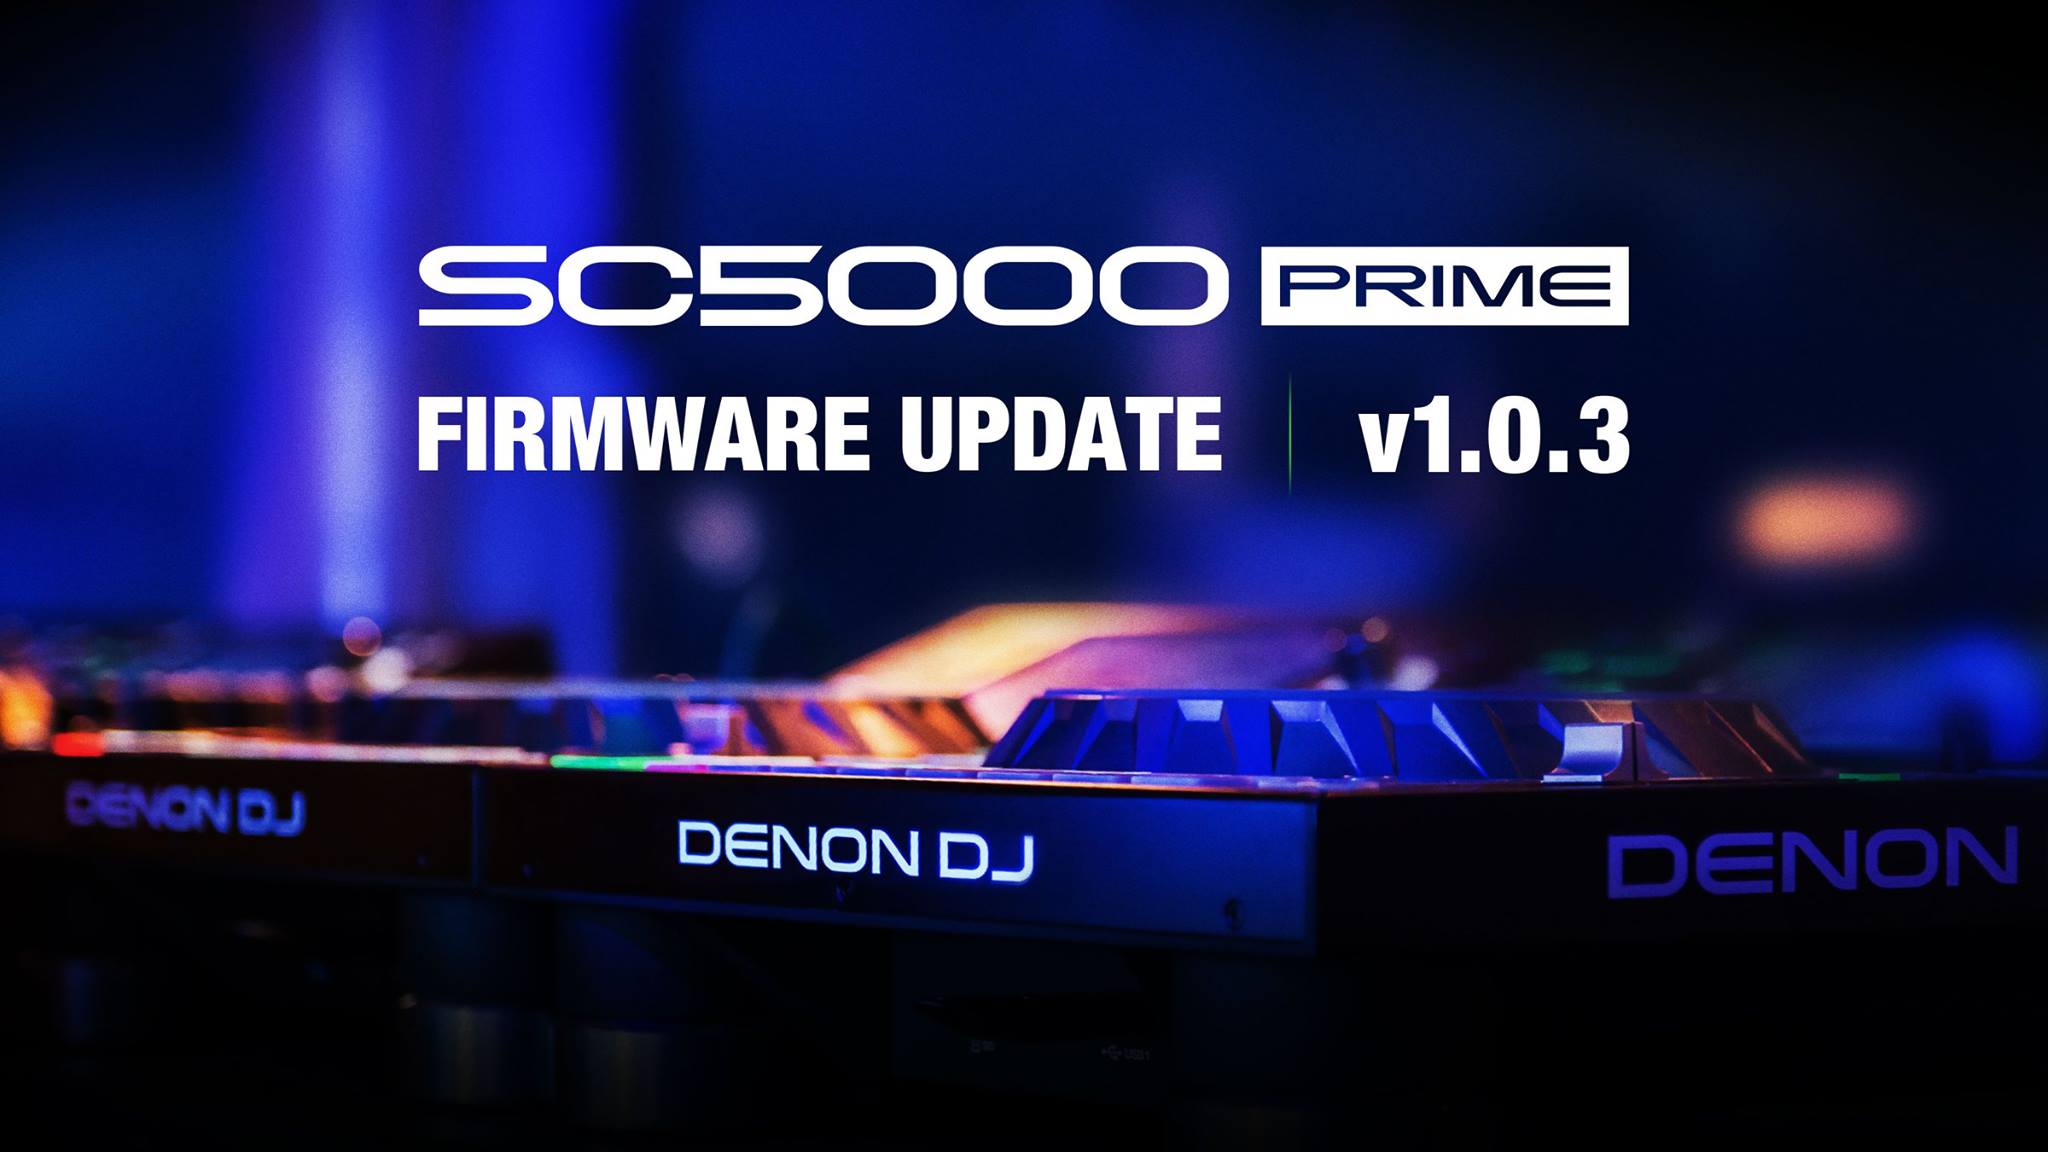 denon-firmware-update-release-notes